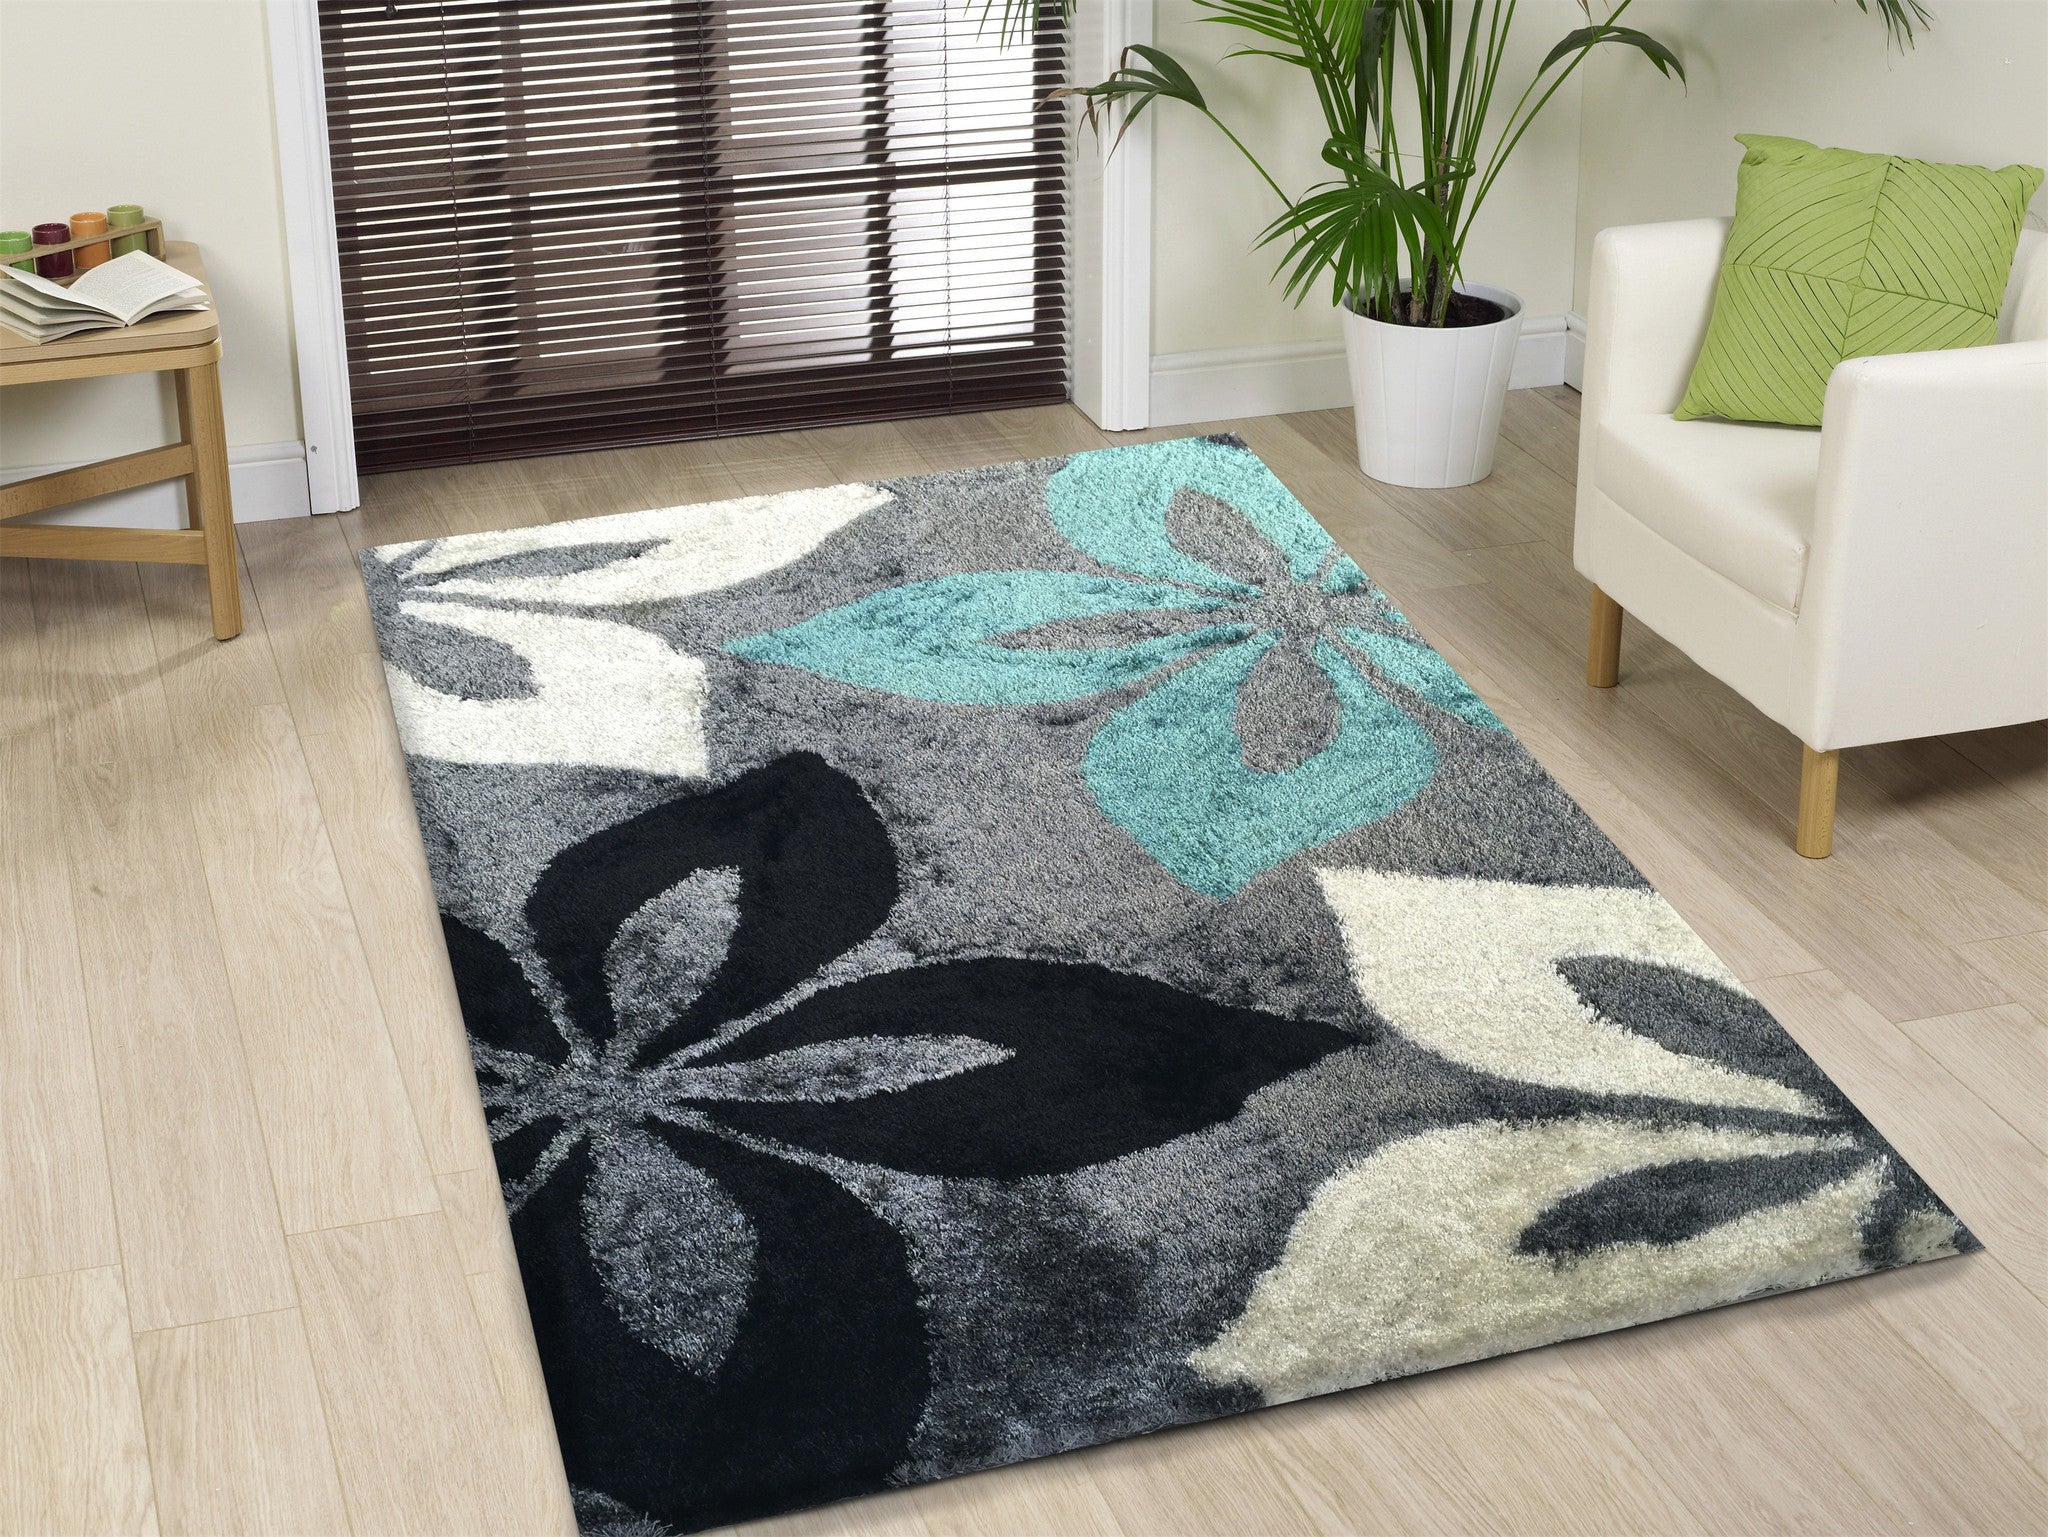 turquoise and grey area rugs | Roselawnlutheran - turquoise and grey area rugs .